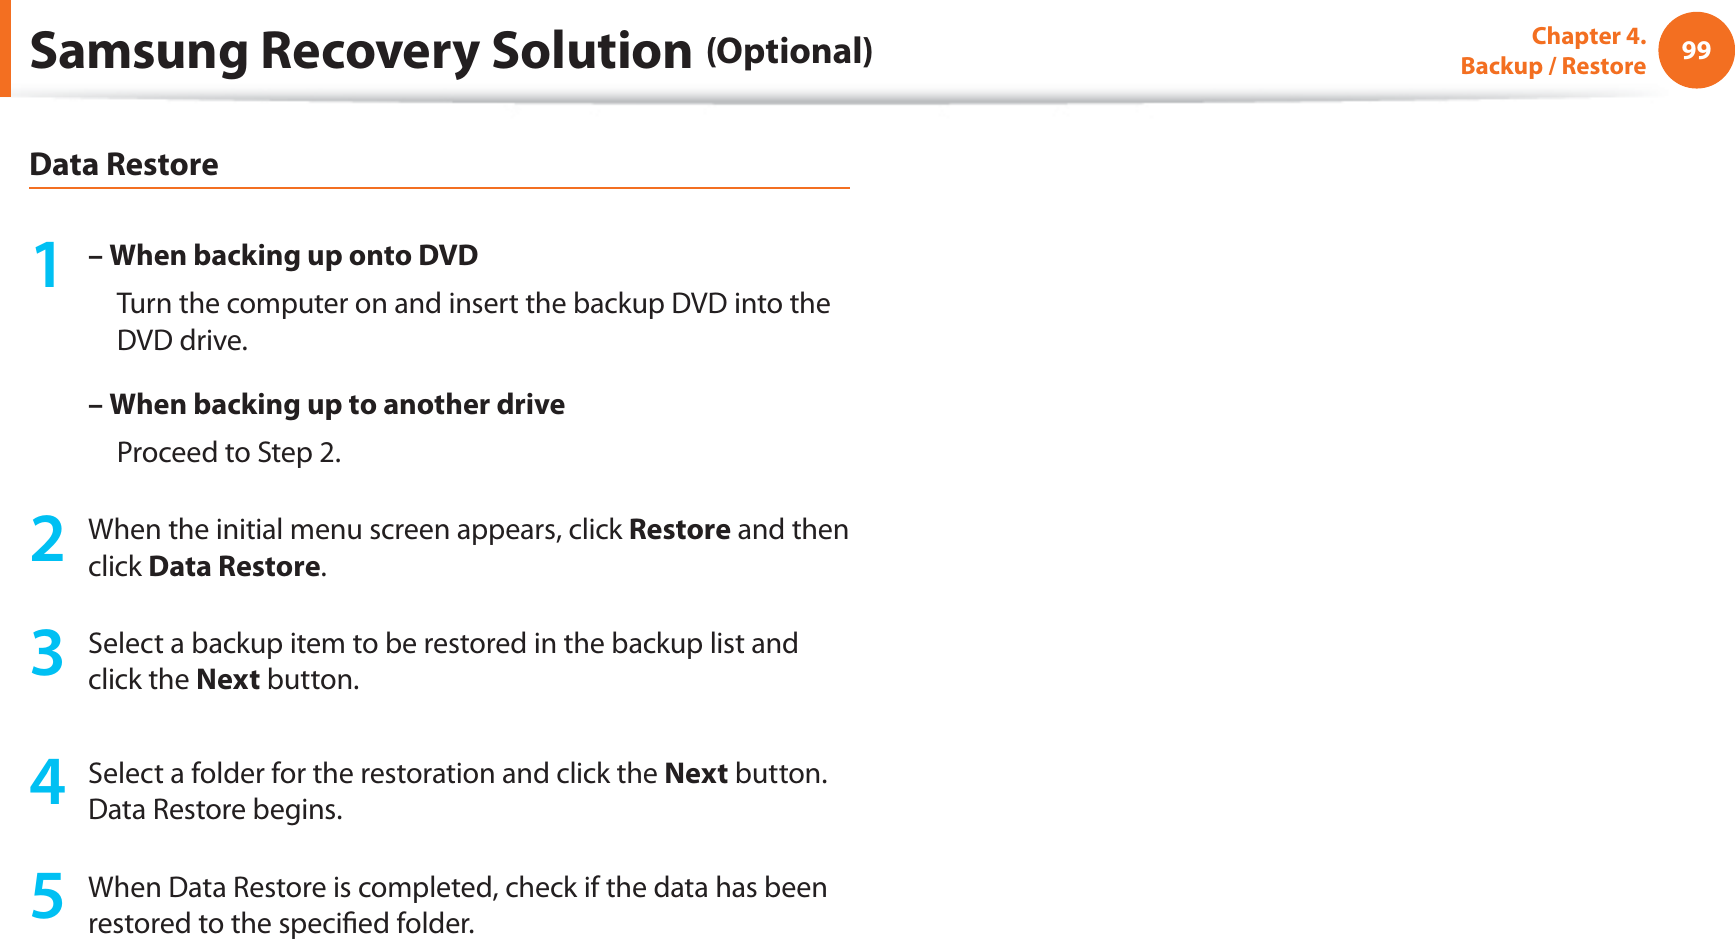 99Chapter  4.   Backup / RestoreData Restore1 – When backing up onto DVD     Turn the computer on and insert the backup DVD into the DVD drive.–  When backing up to another drive     Proceed to Step 2.2  When the initial menu screen appears, click Restore and then click Data Restore.3  Select a backup item to be restored in the backup list and click the Next button.4  Select a folder for the restoration and click the Next button. Data Restore begins.5  When Data Restore is completed, check if the data has been restored to the specied folder.Samsung Recovery Solution (Optional)